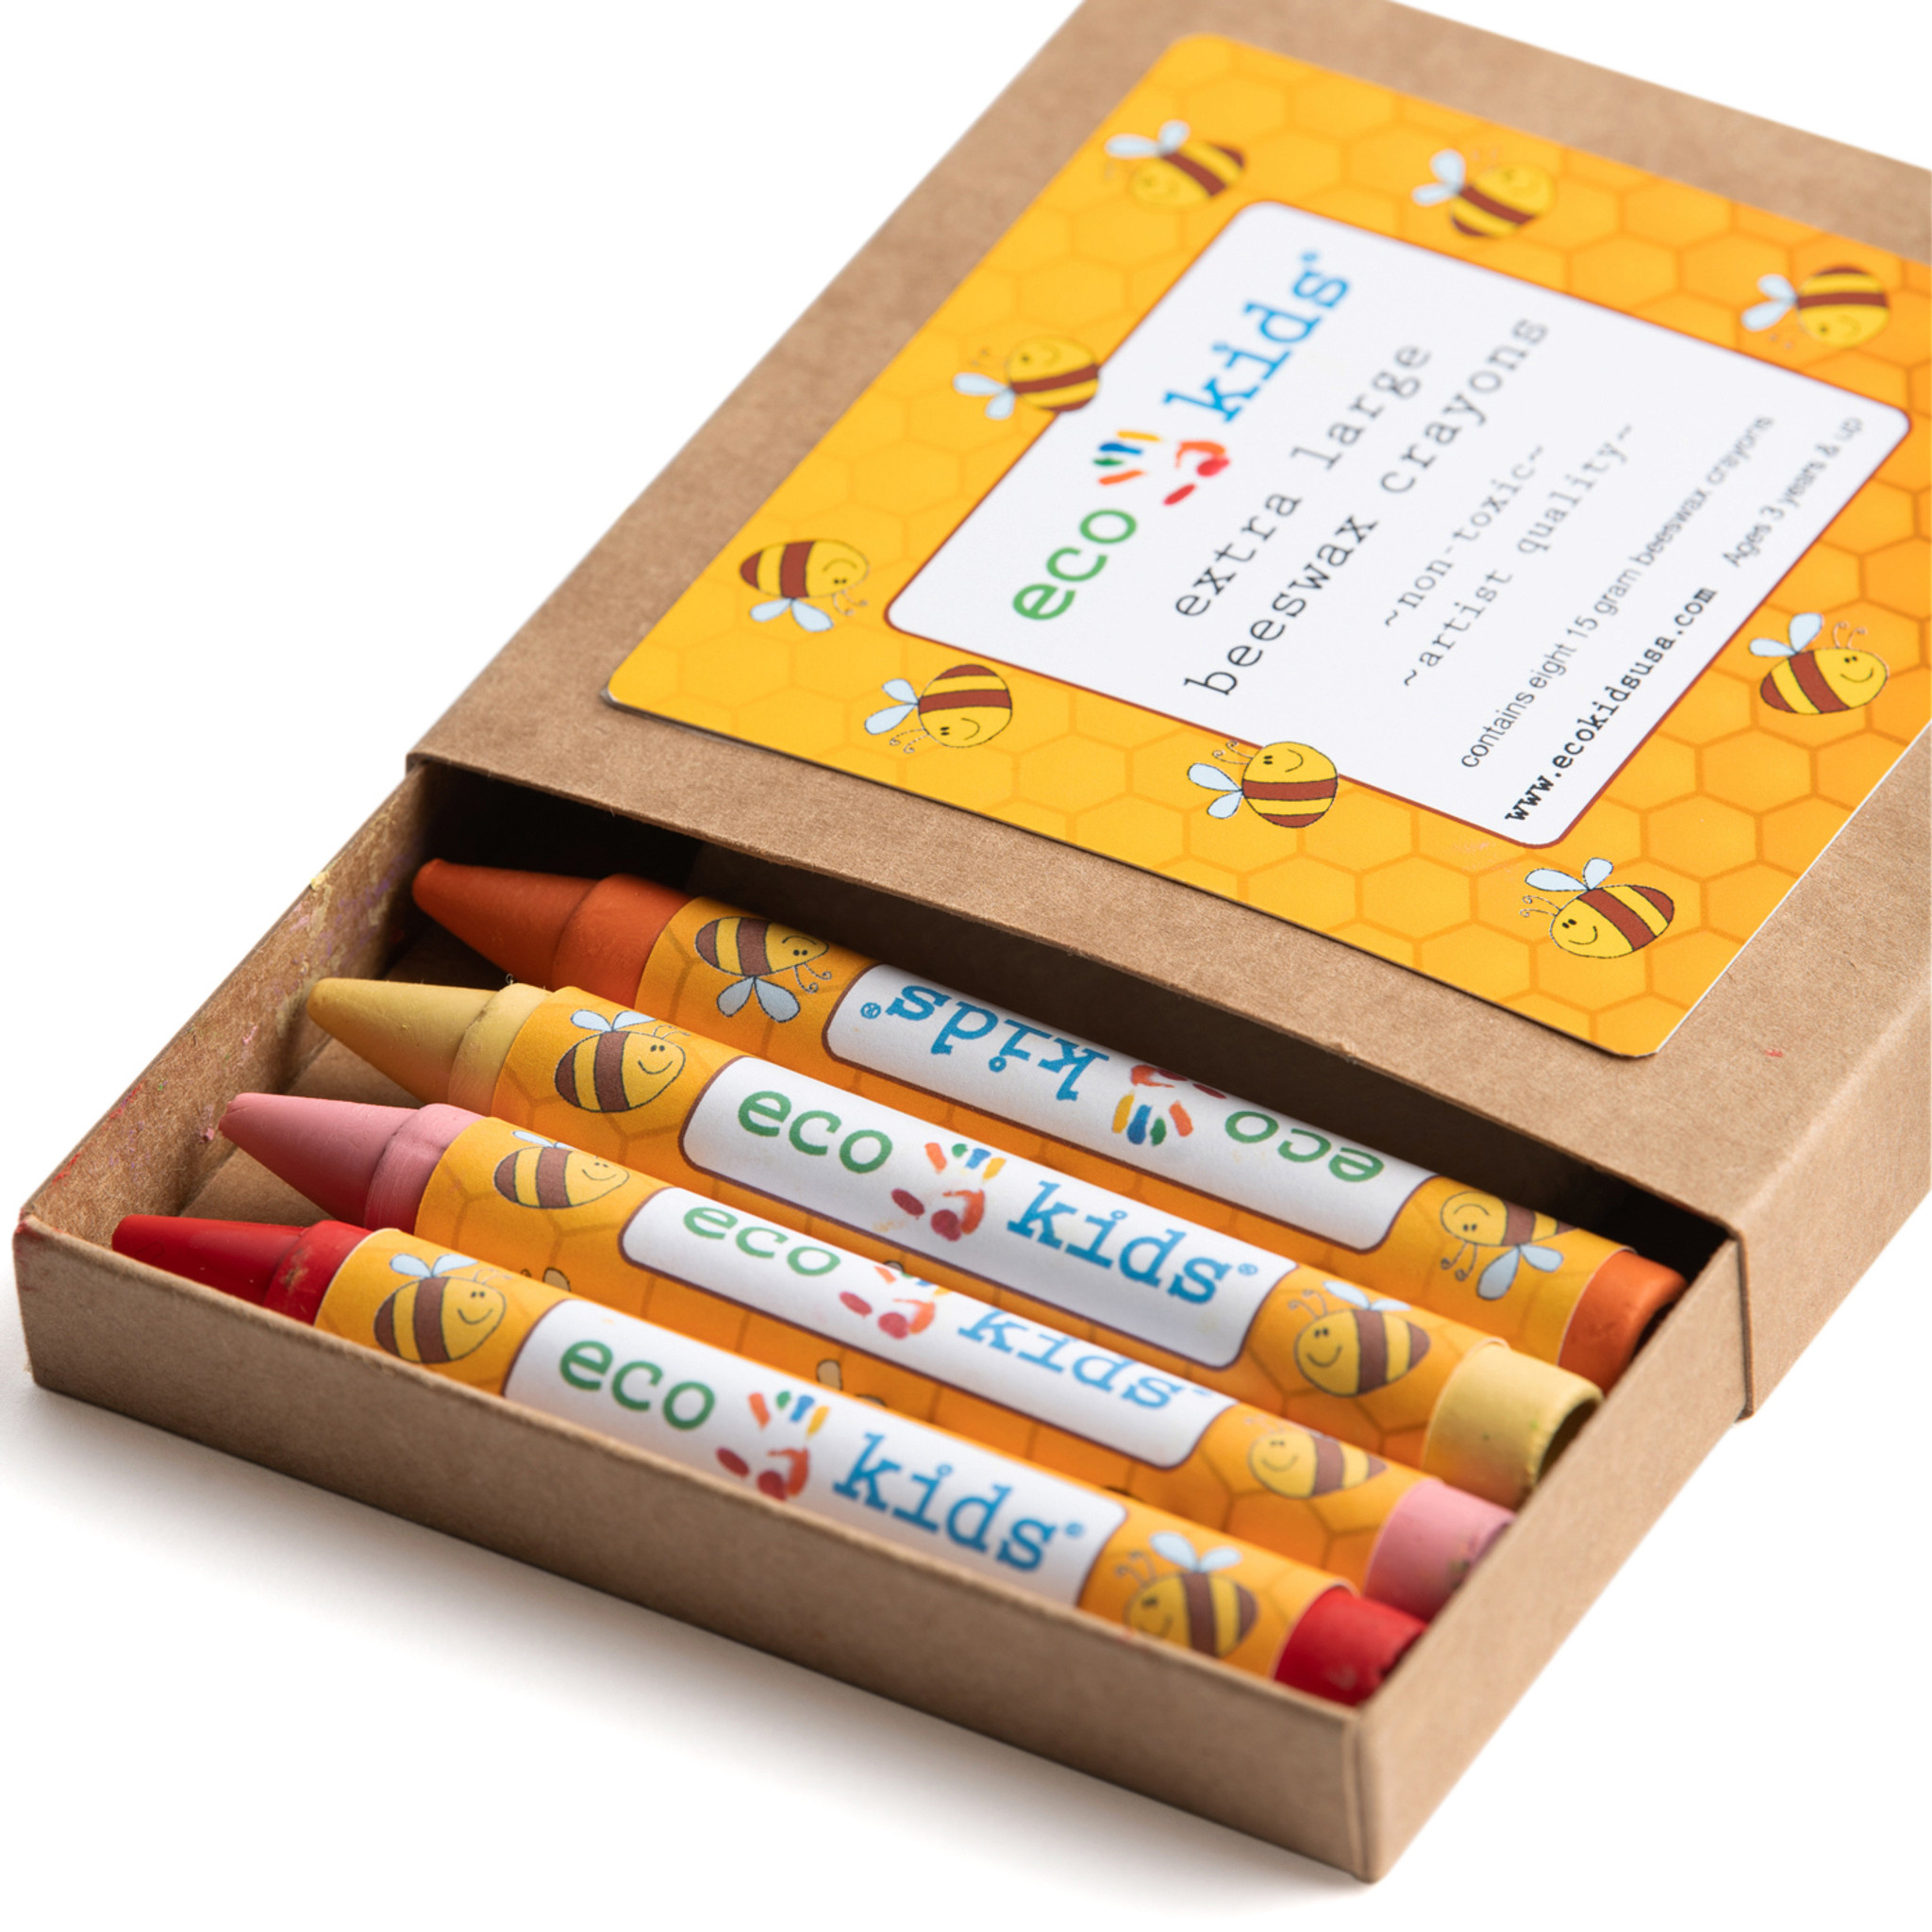 GIOTTO be-bè Wax Crayons, 10 Assorted Colours Pack, Large, Perfect for  Young Kids